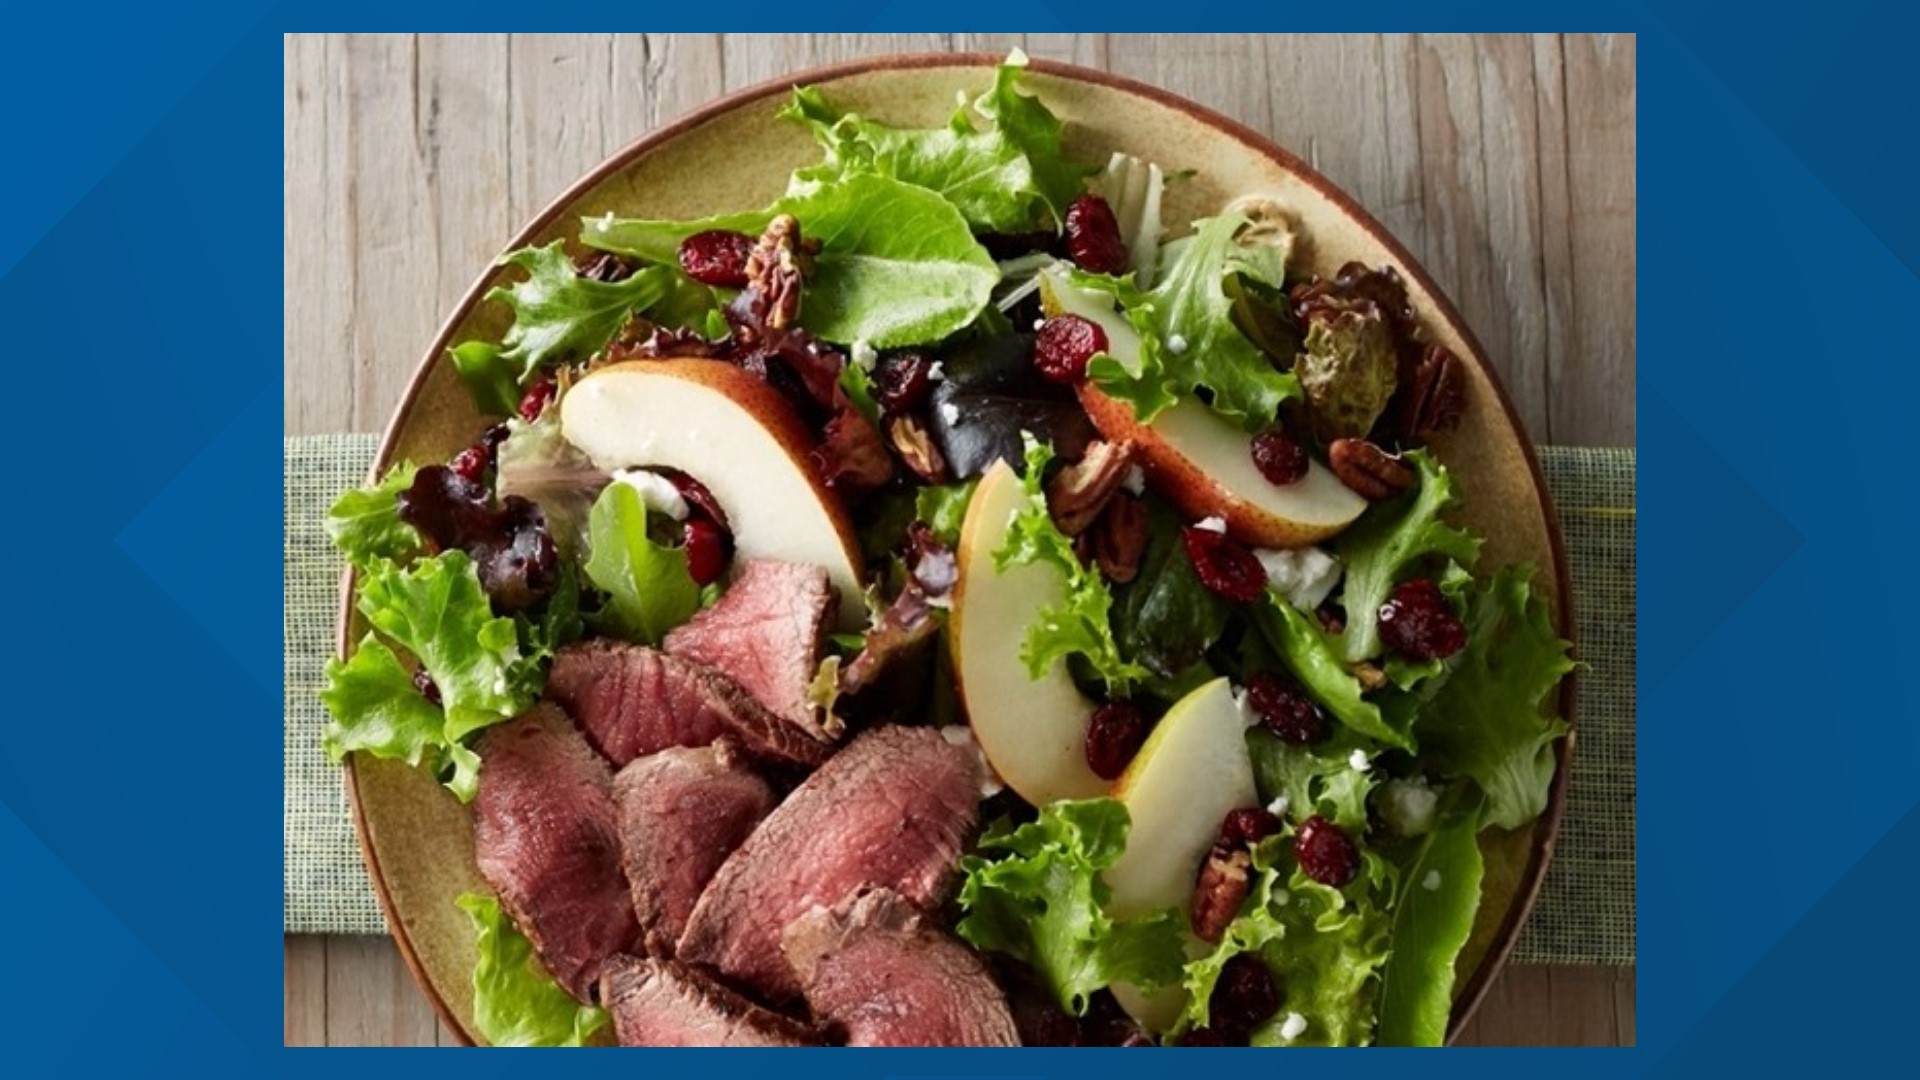 Steak and salad? It's the best of both worlds!